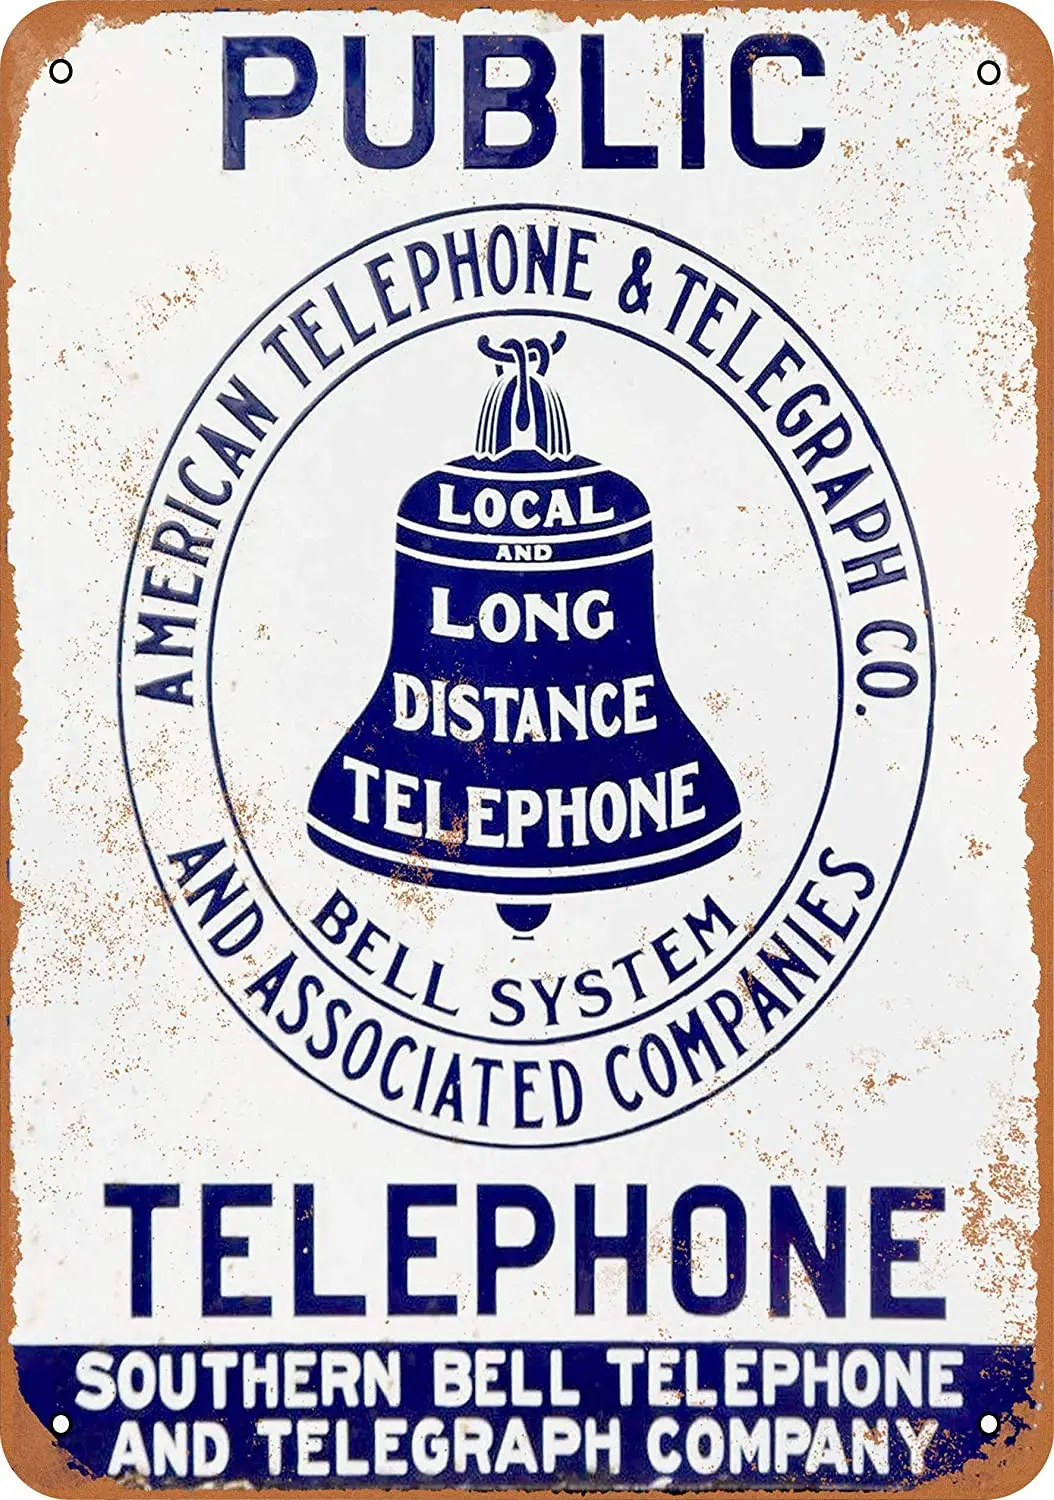 

WallColor 8*12 Metal Sign Public Phone Southern Bell Telephone Vintage Look Reproduction